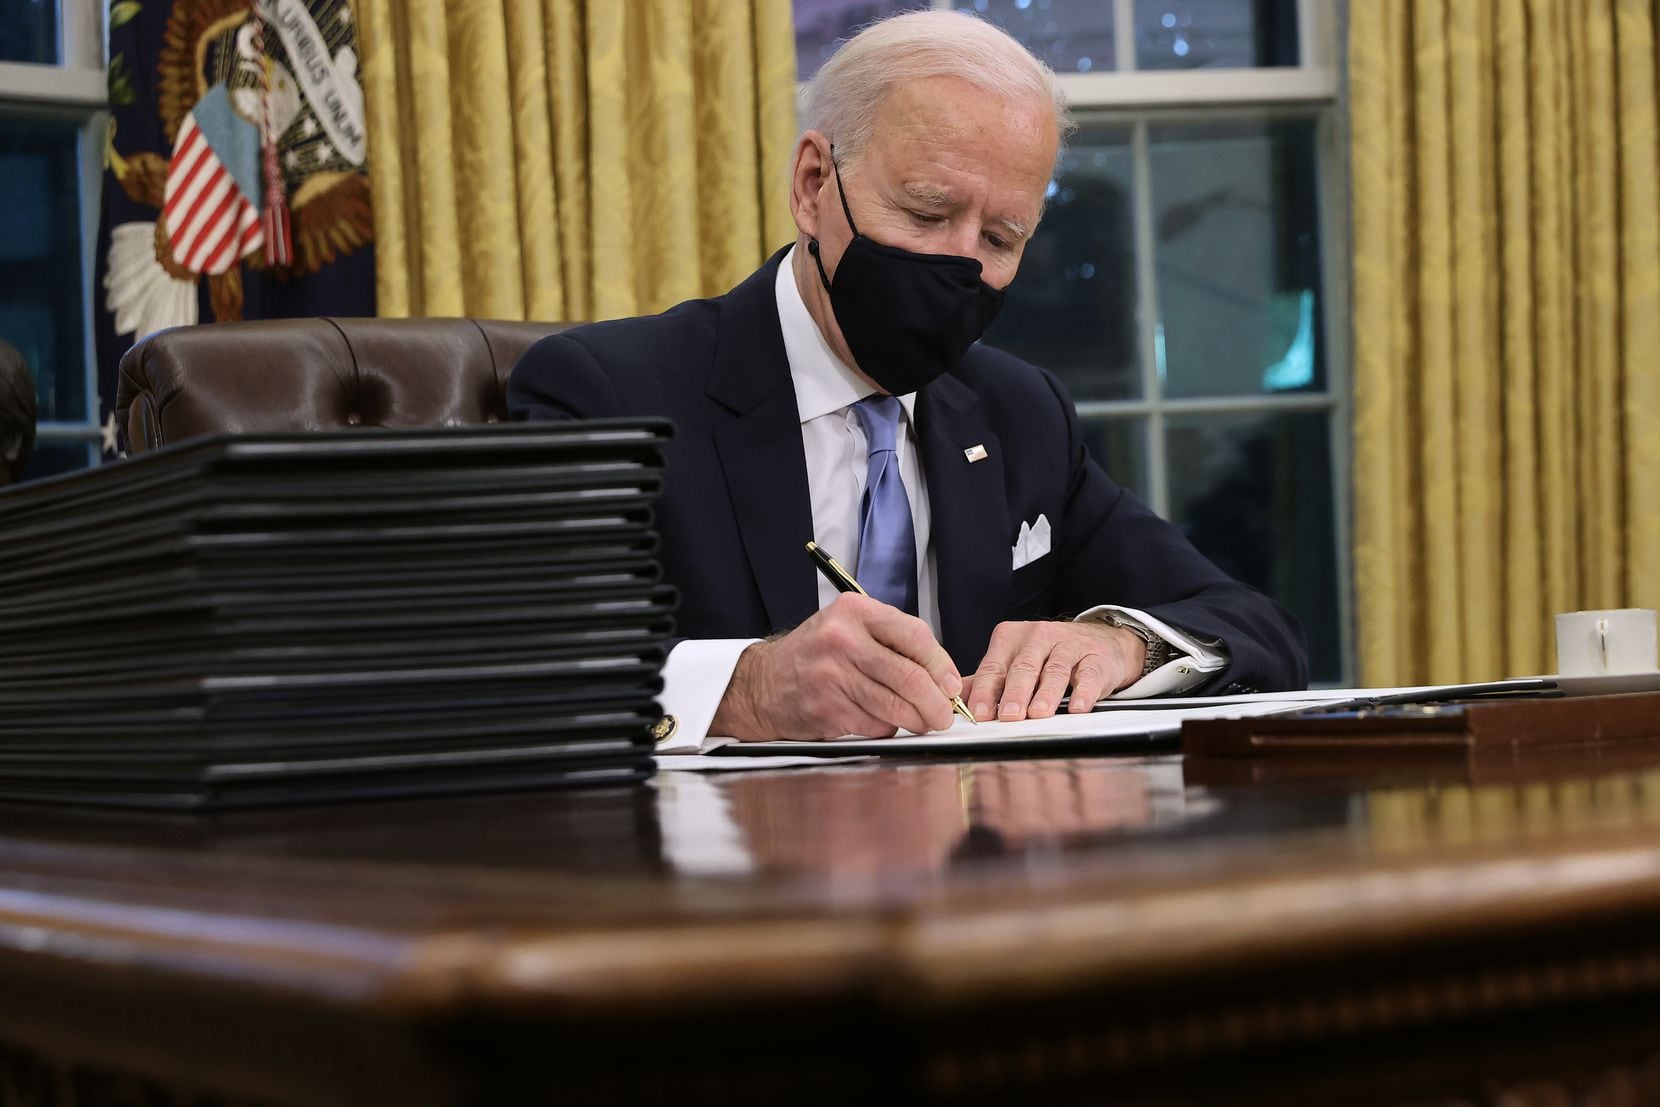 President Joe Biden signs executive orders at the Resolute Desk in the Oval Office just hours after his inauguration on January 20, 2021.